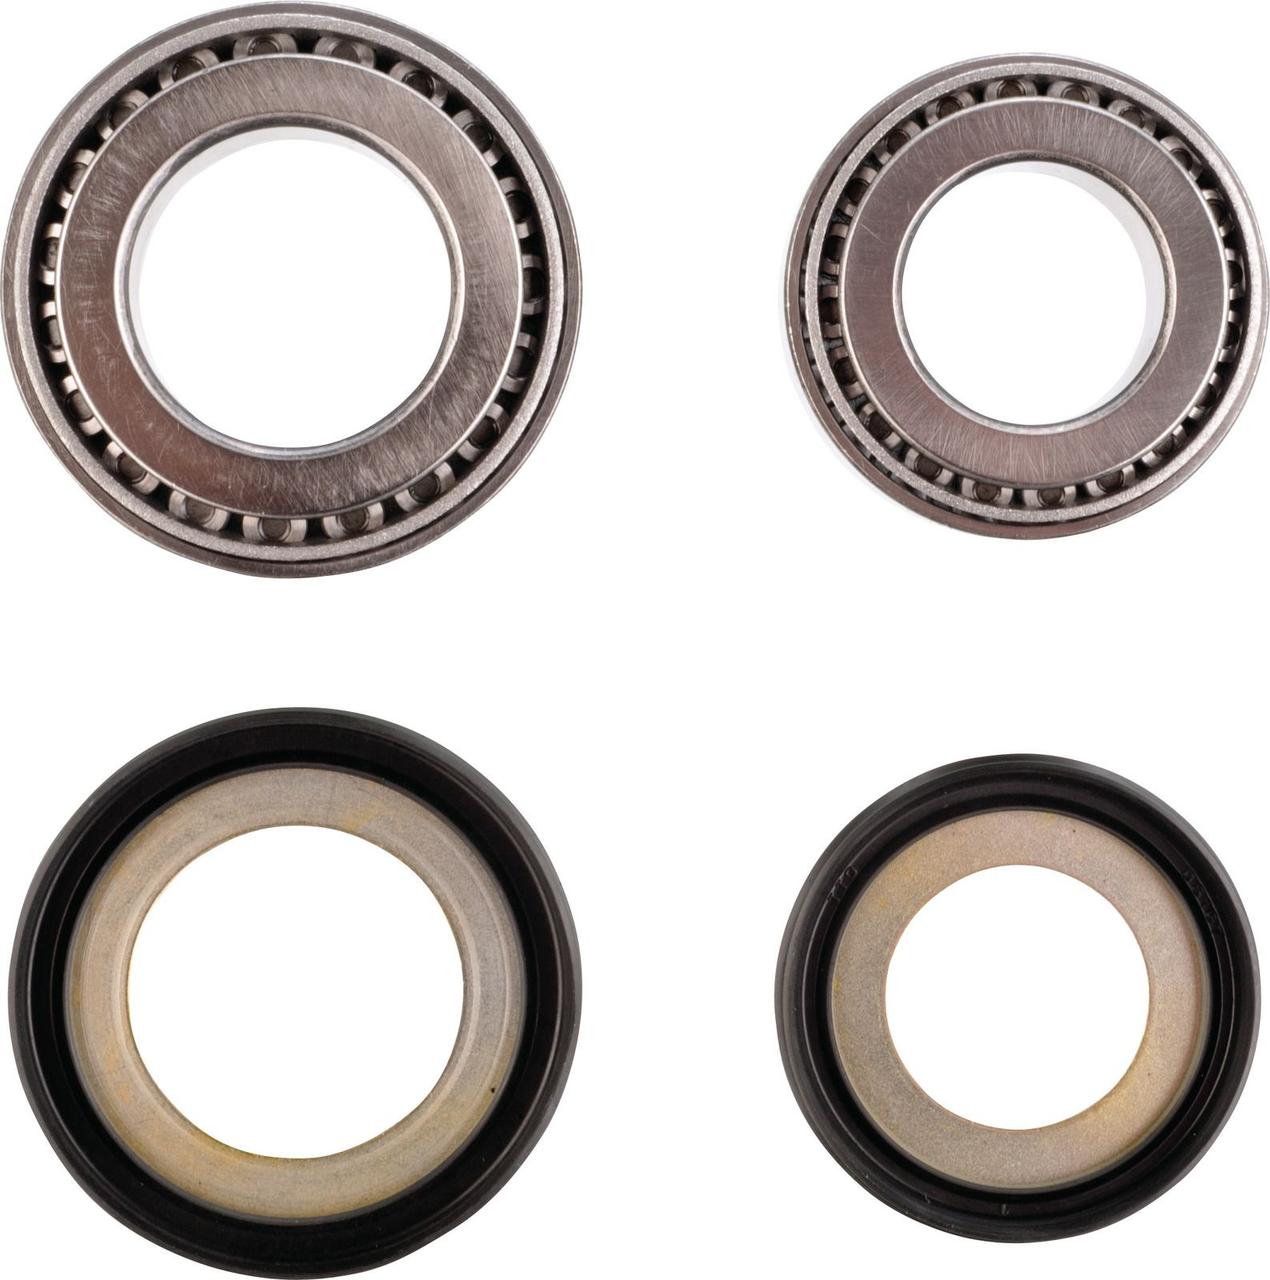 HD Steering Head Bearing Set Ténéré700 (XTZ690) 2019 and later, Tapered Rollers incl. Dust Seals for Bottom and Top